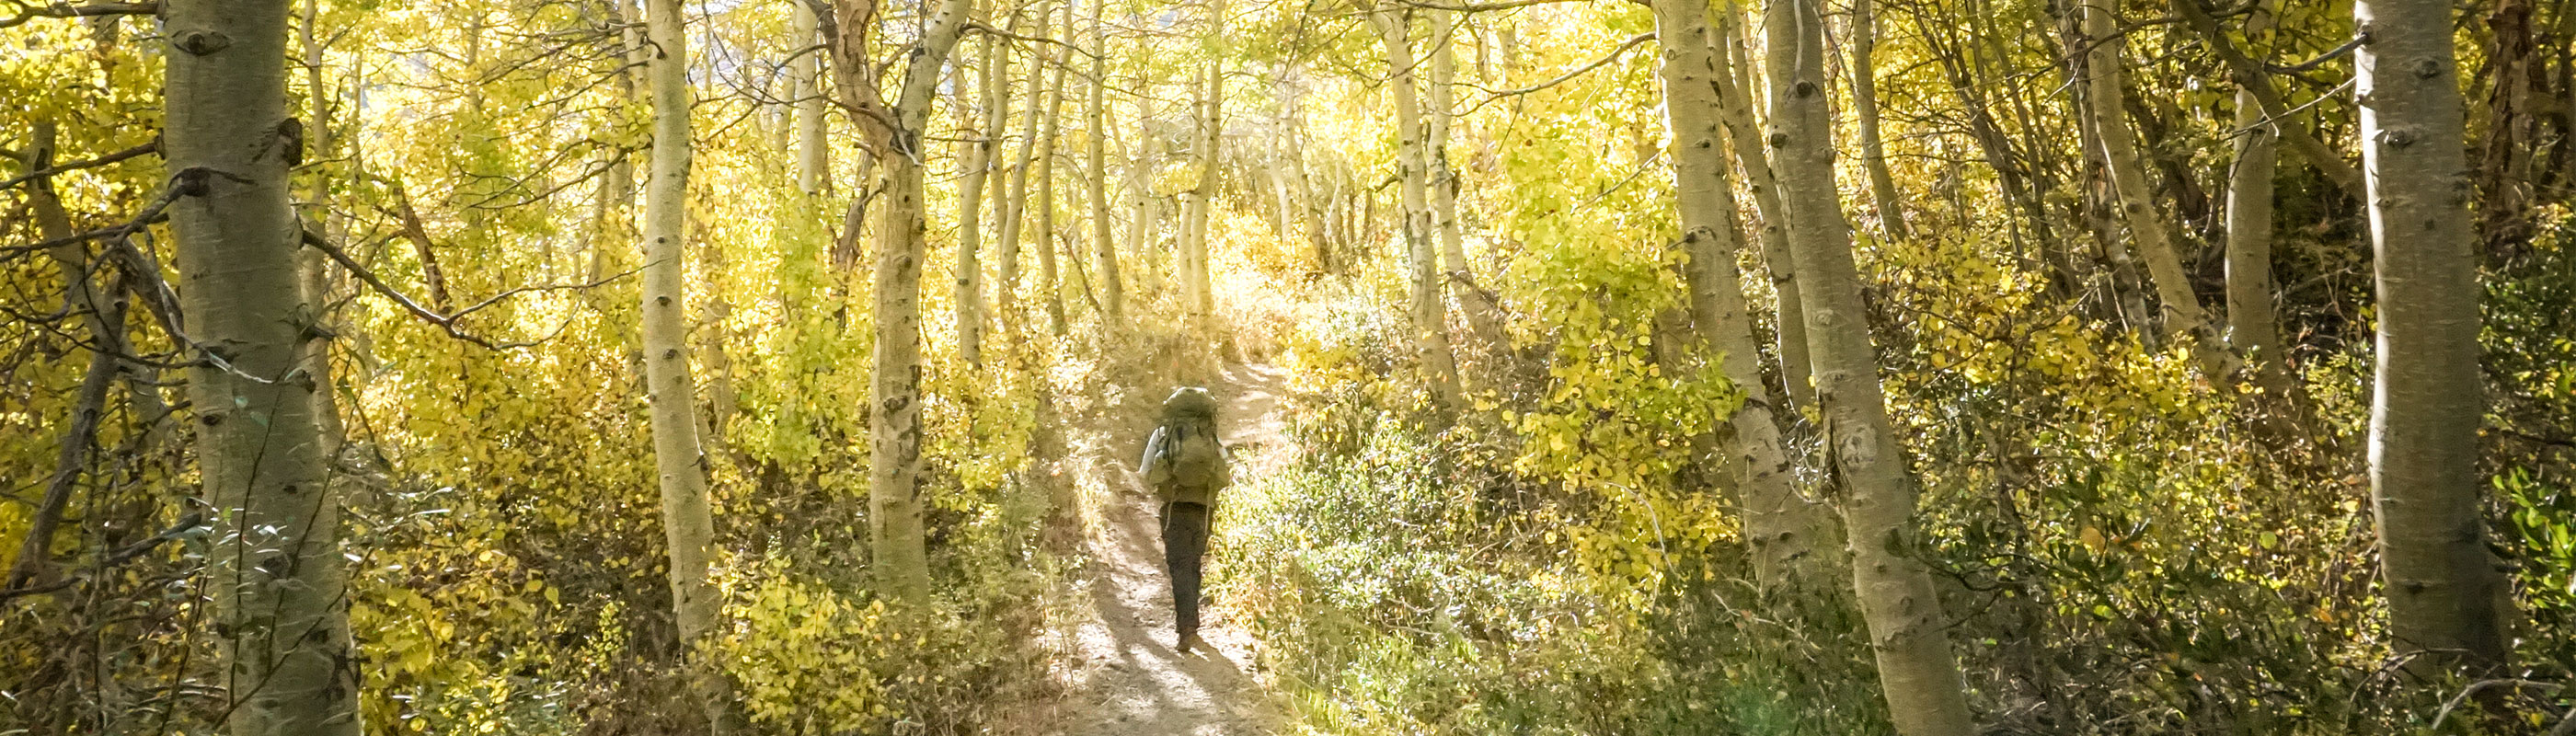 A backpacker walking amidst a forest of trees with yellow leaves